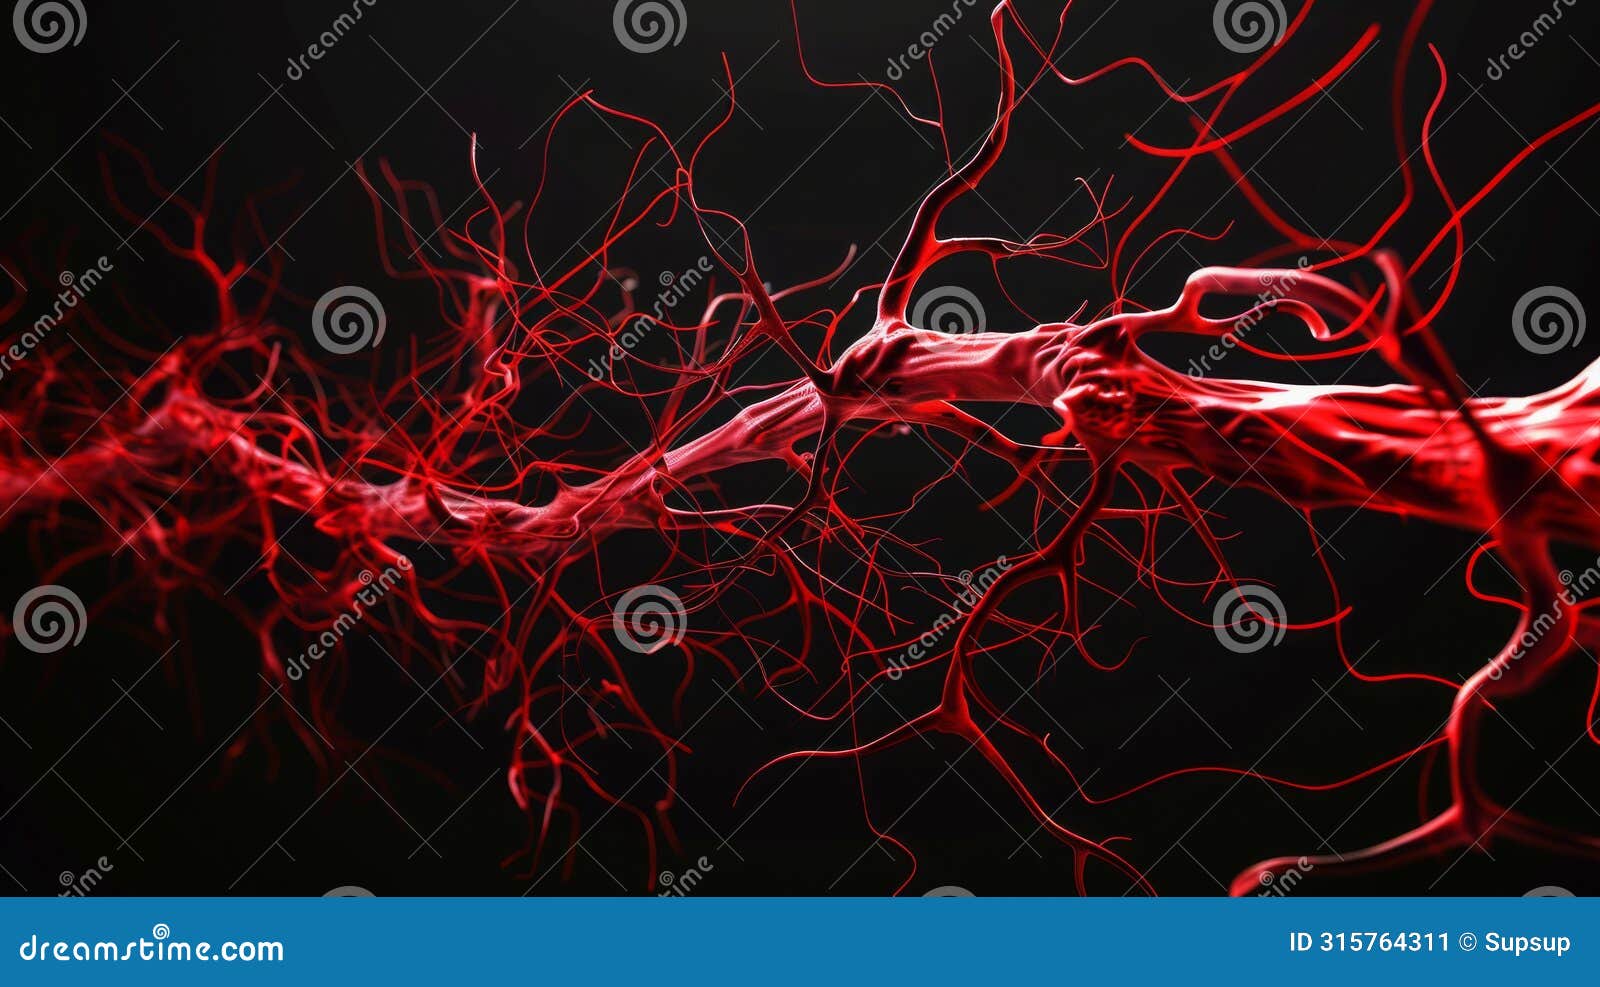 abstract red neuronal synapses simulation